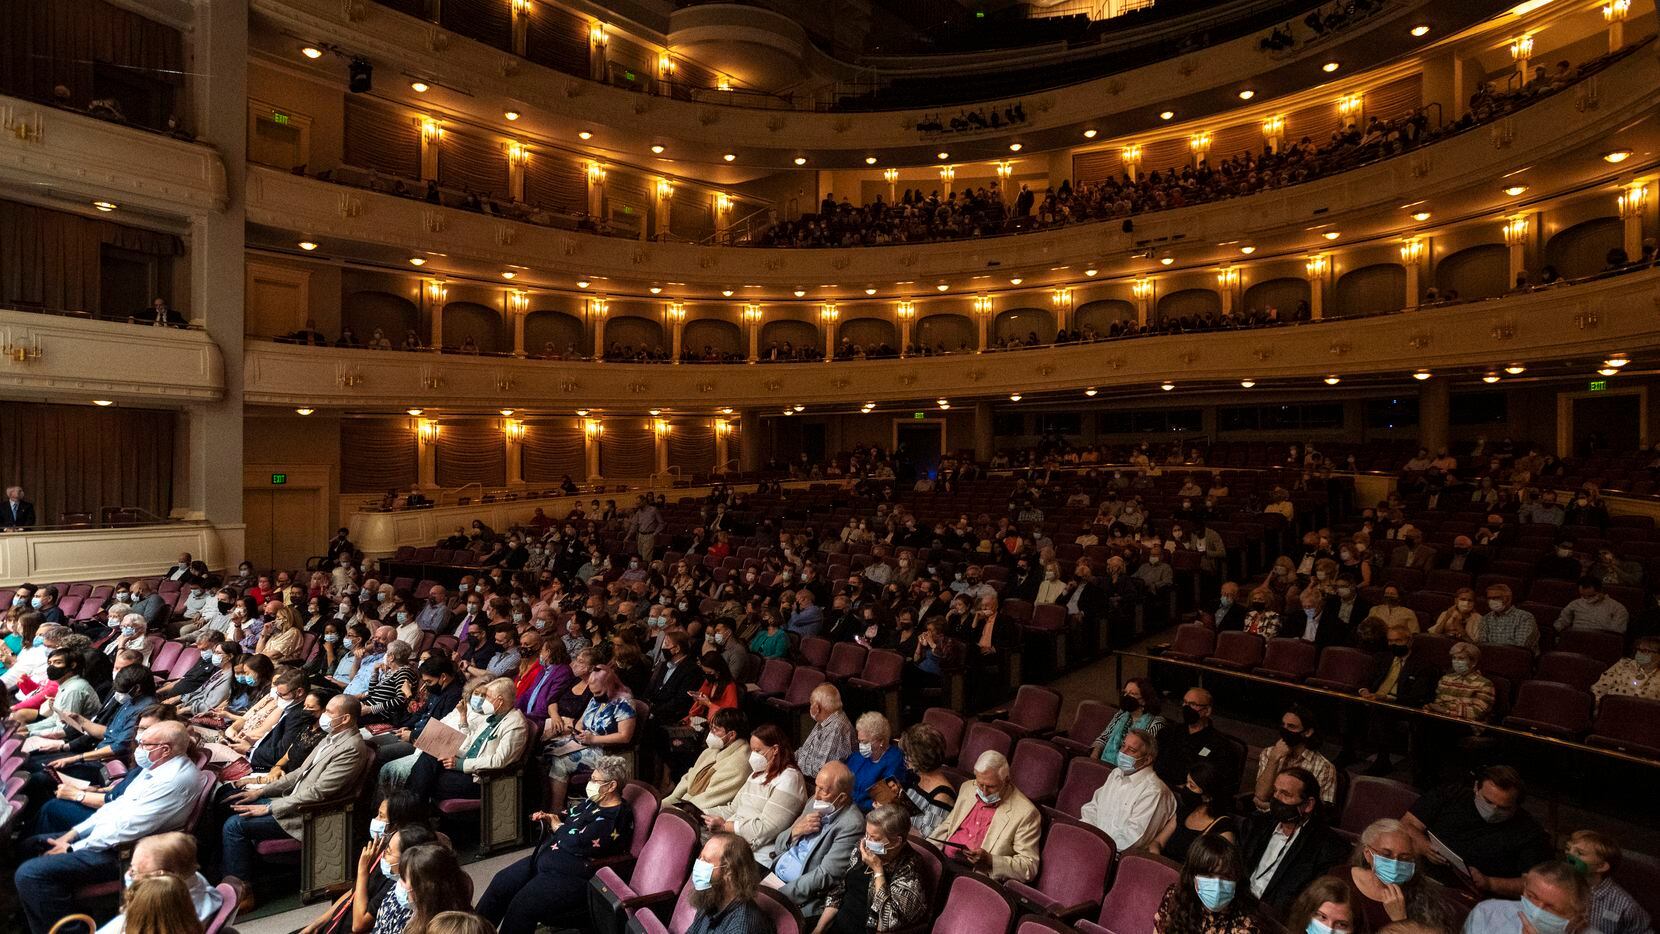 The audience at The Fort Worth Symphony Orchestra's concert on Sept. 17, 2021, at the Bass...